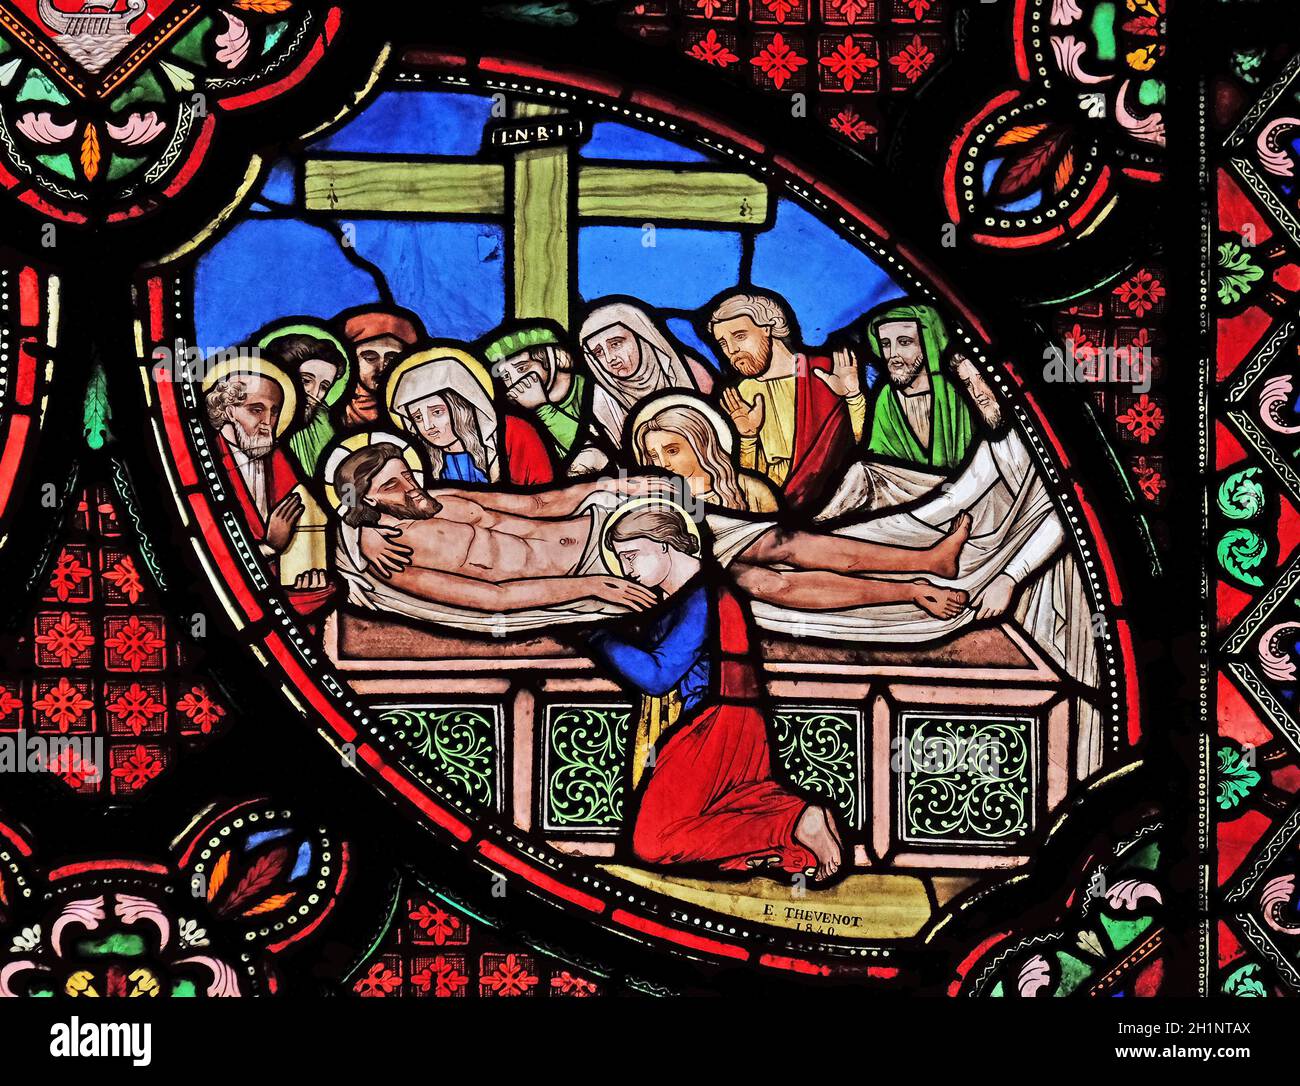 Entombment of Christ, stained glass window from Saint Germain-l'Auxerrois church in Paris, France Stock Photo